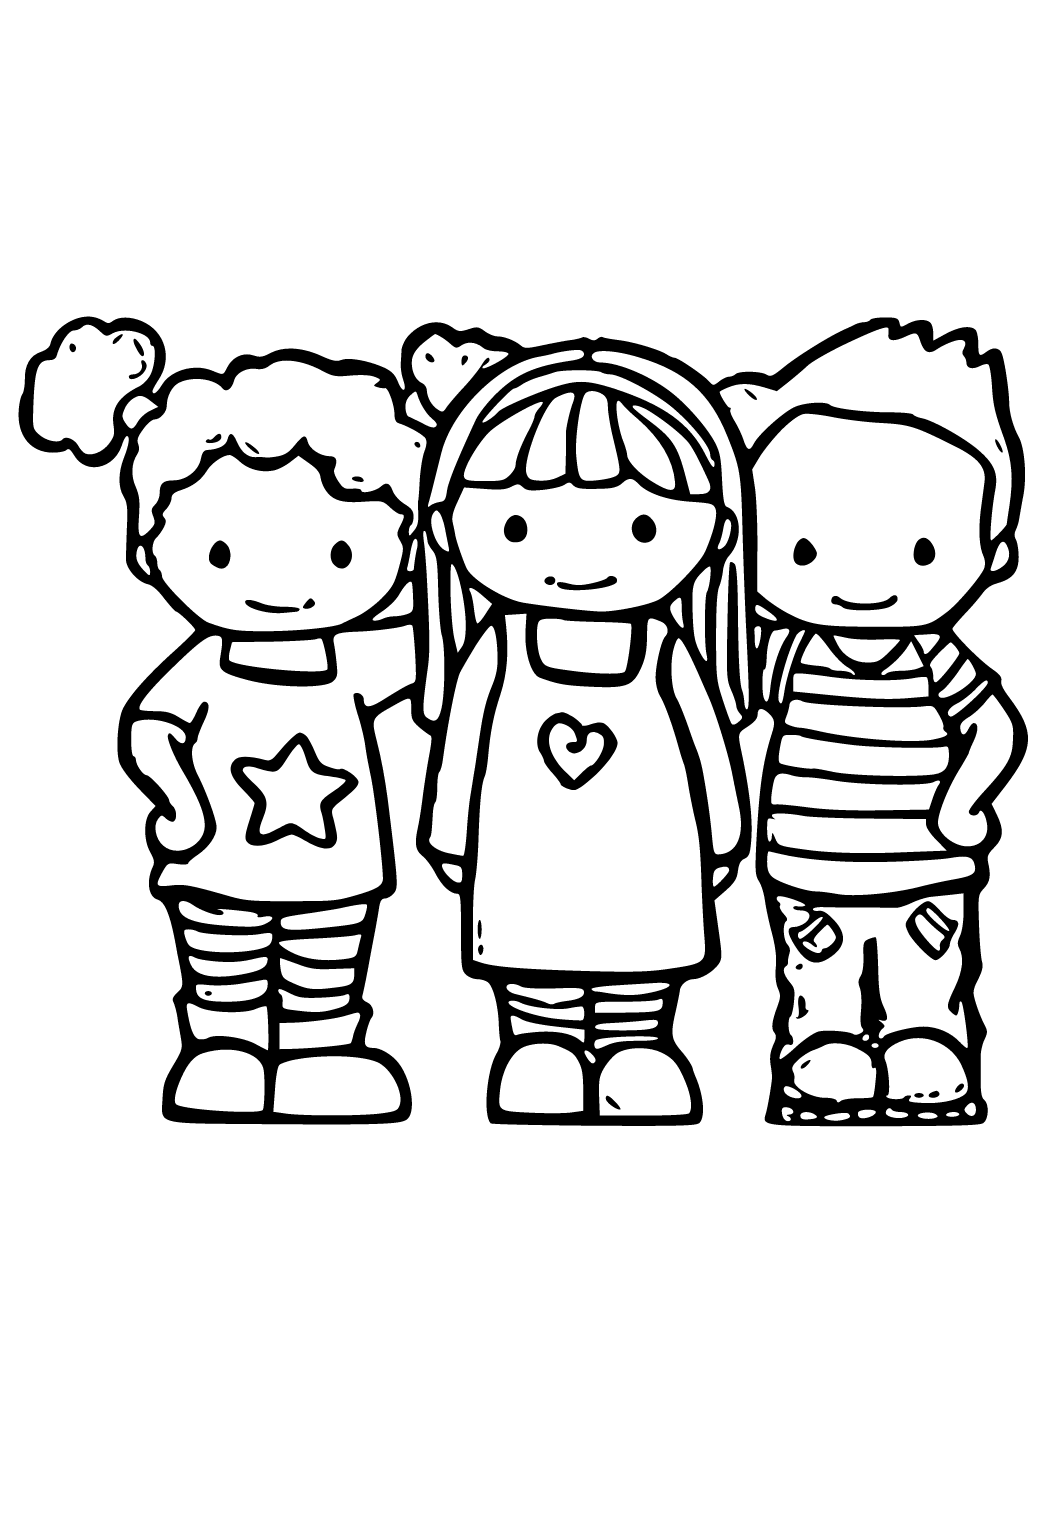 Free printable best friend cute coloring page for adults and kids